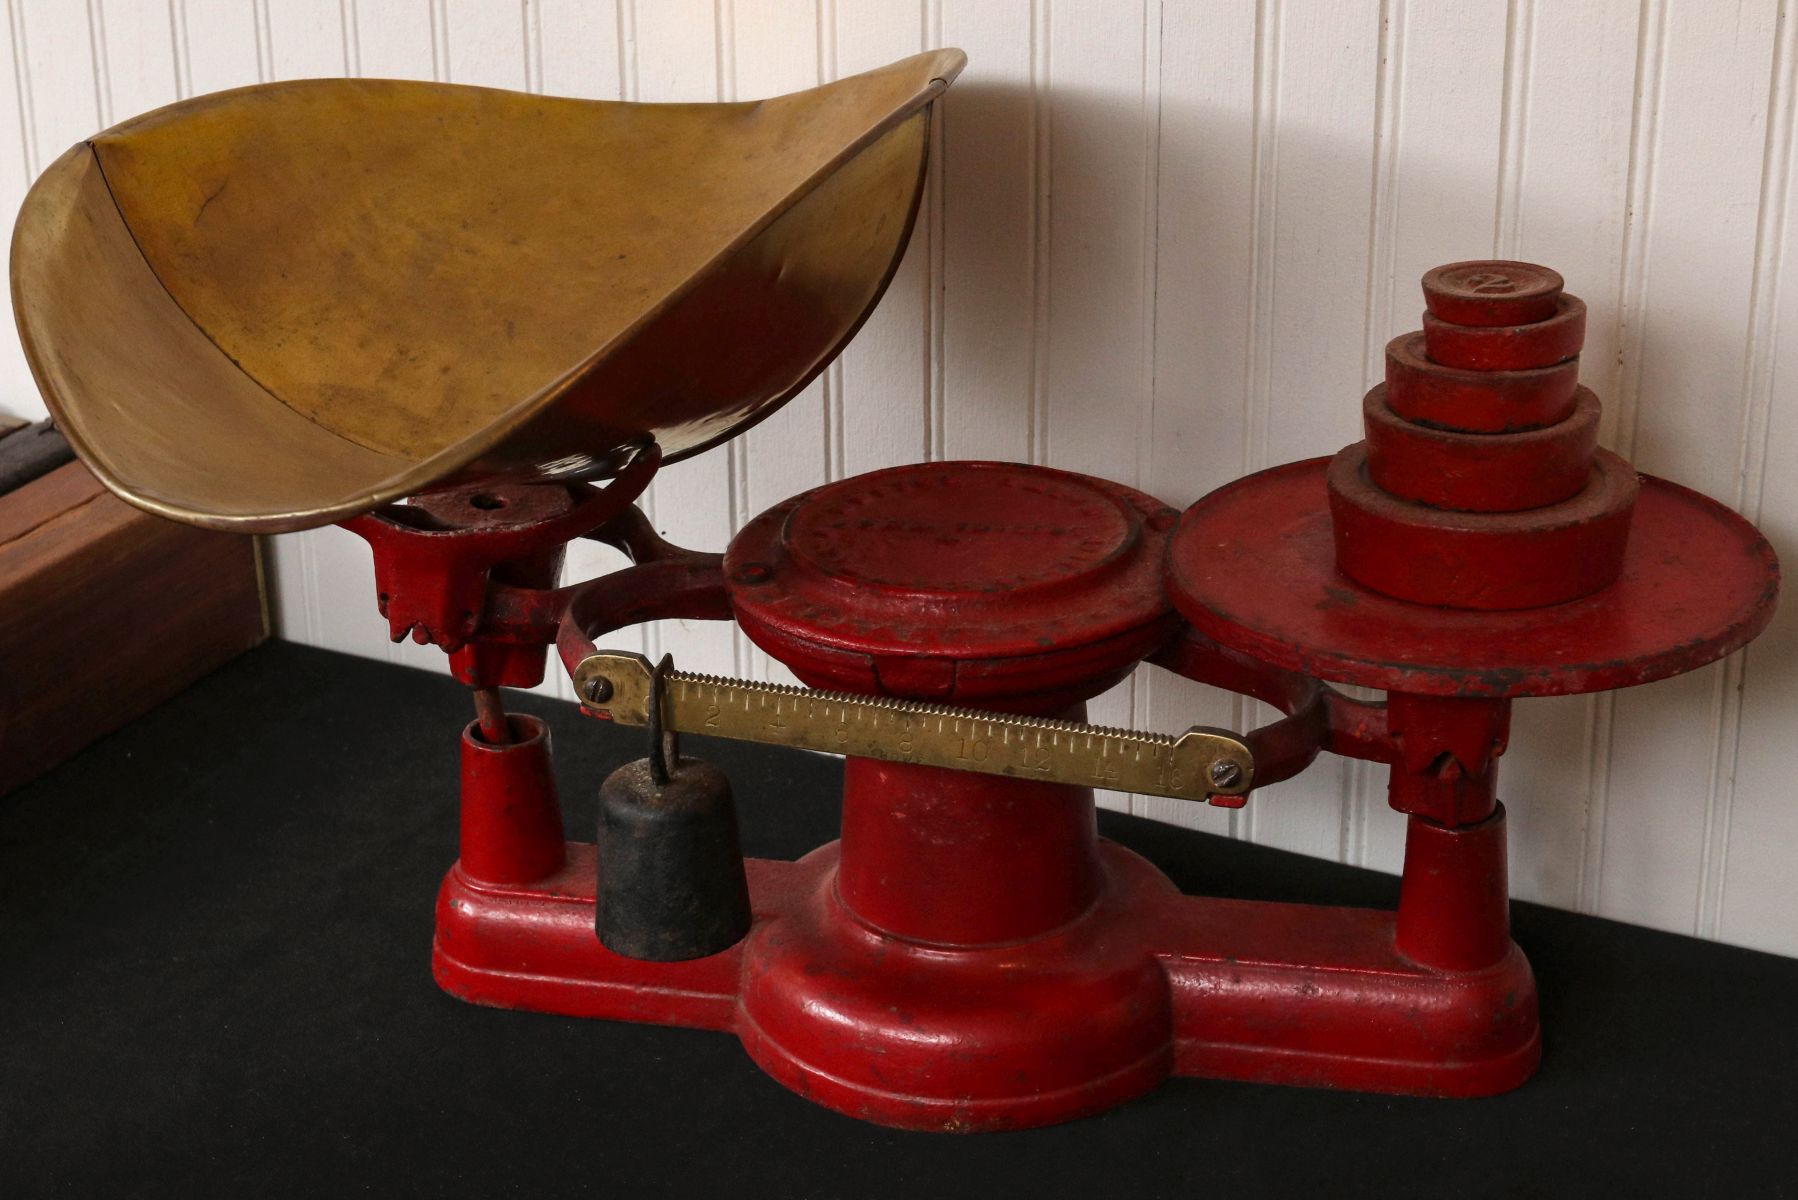 HOWE ANTIQUE IRON BALANCE SCALES DATED 1867